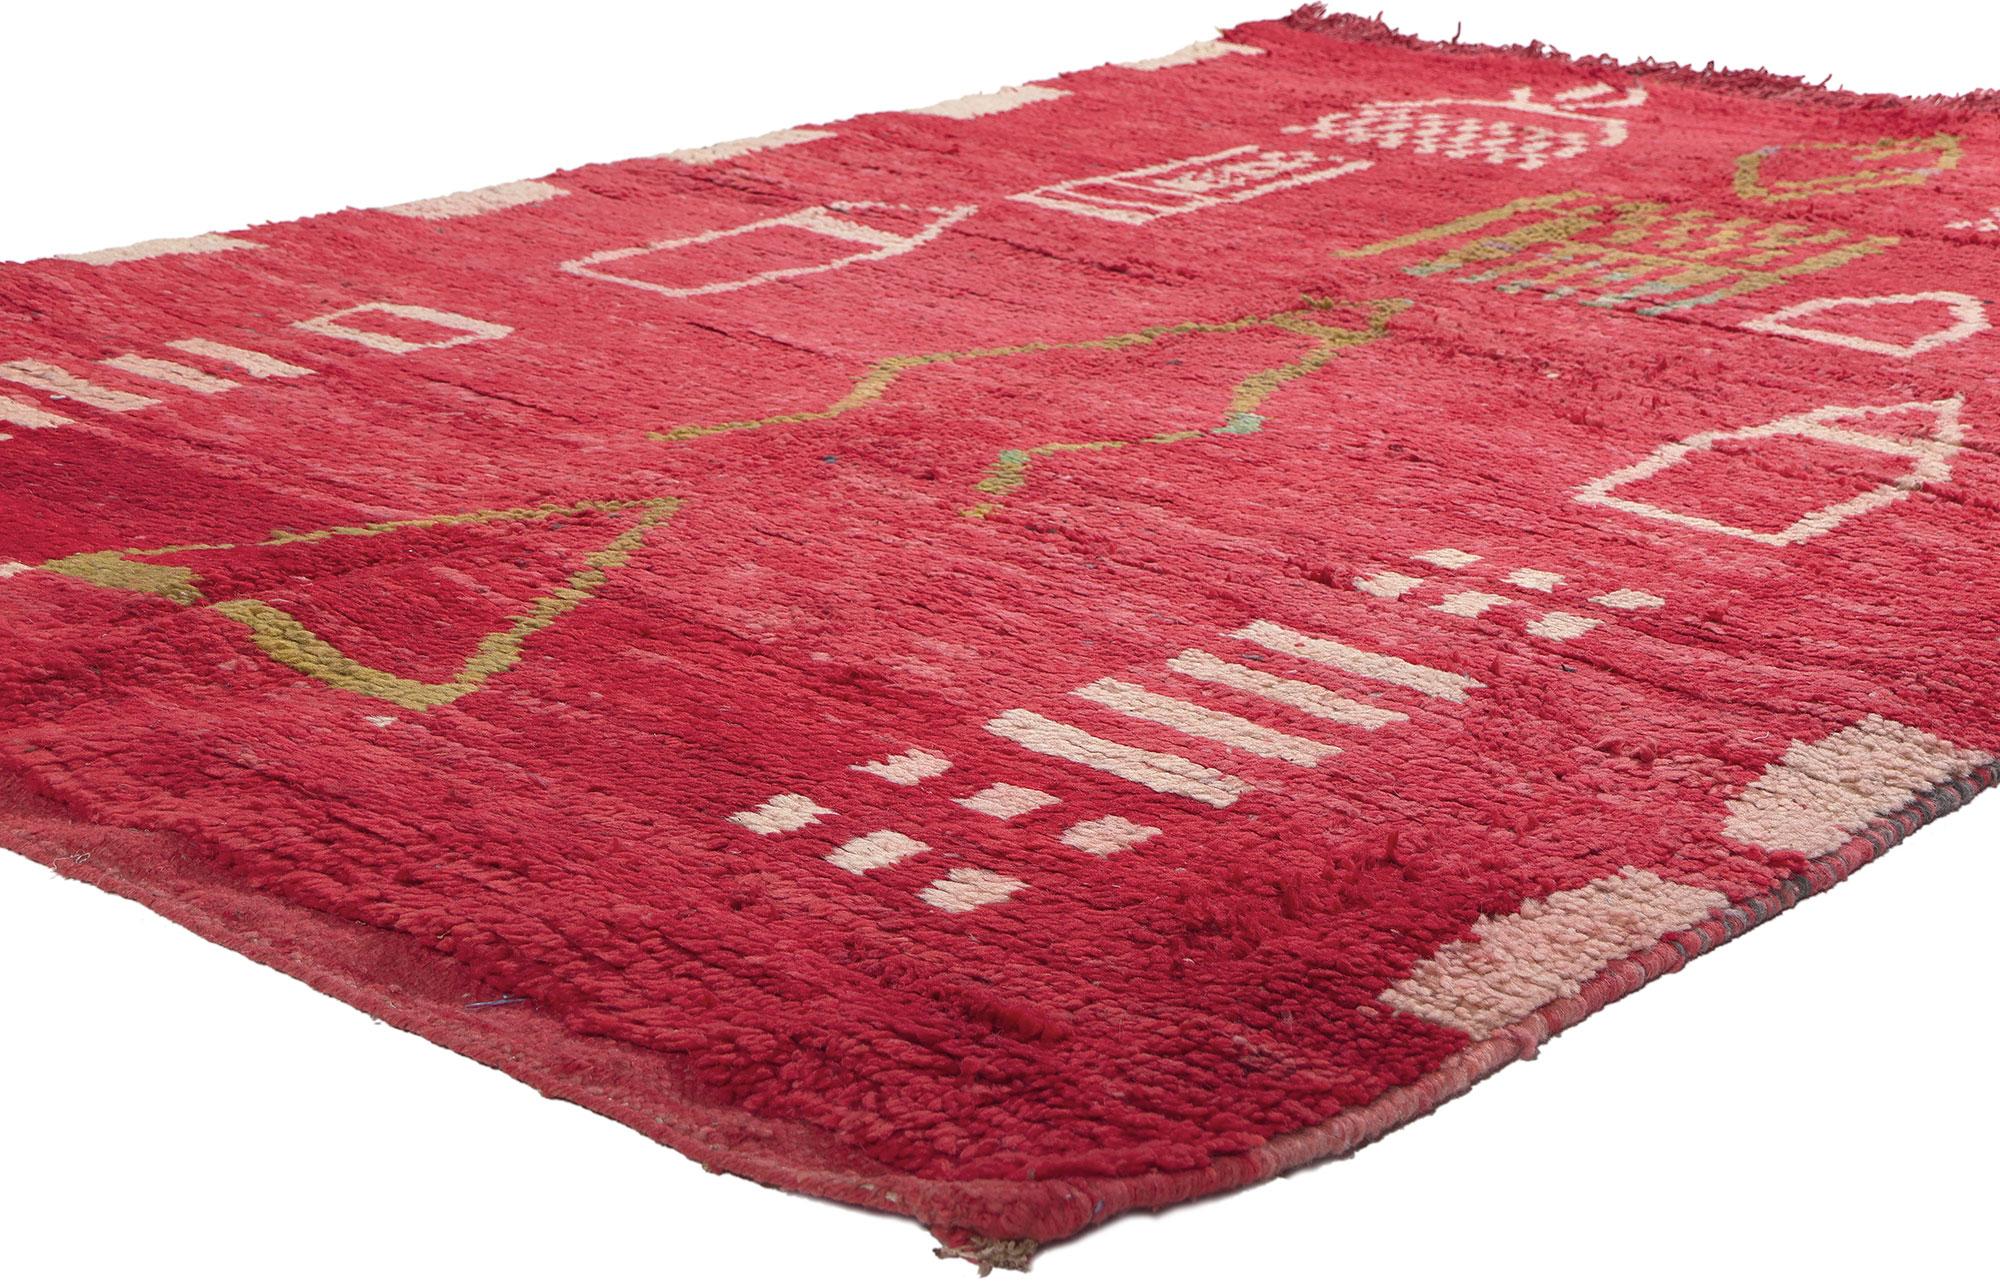 20265 Vintage Red Boujad Moroccan Rug, 05'03 x 07'08. Originating from the vibrant city of Boujad in the Khouribga region, a historical pilgrimage center and bustling commercial hub along the caravan route between Fes and Marrakesh, Boujad rugs are